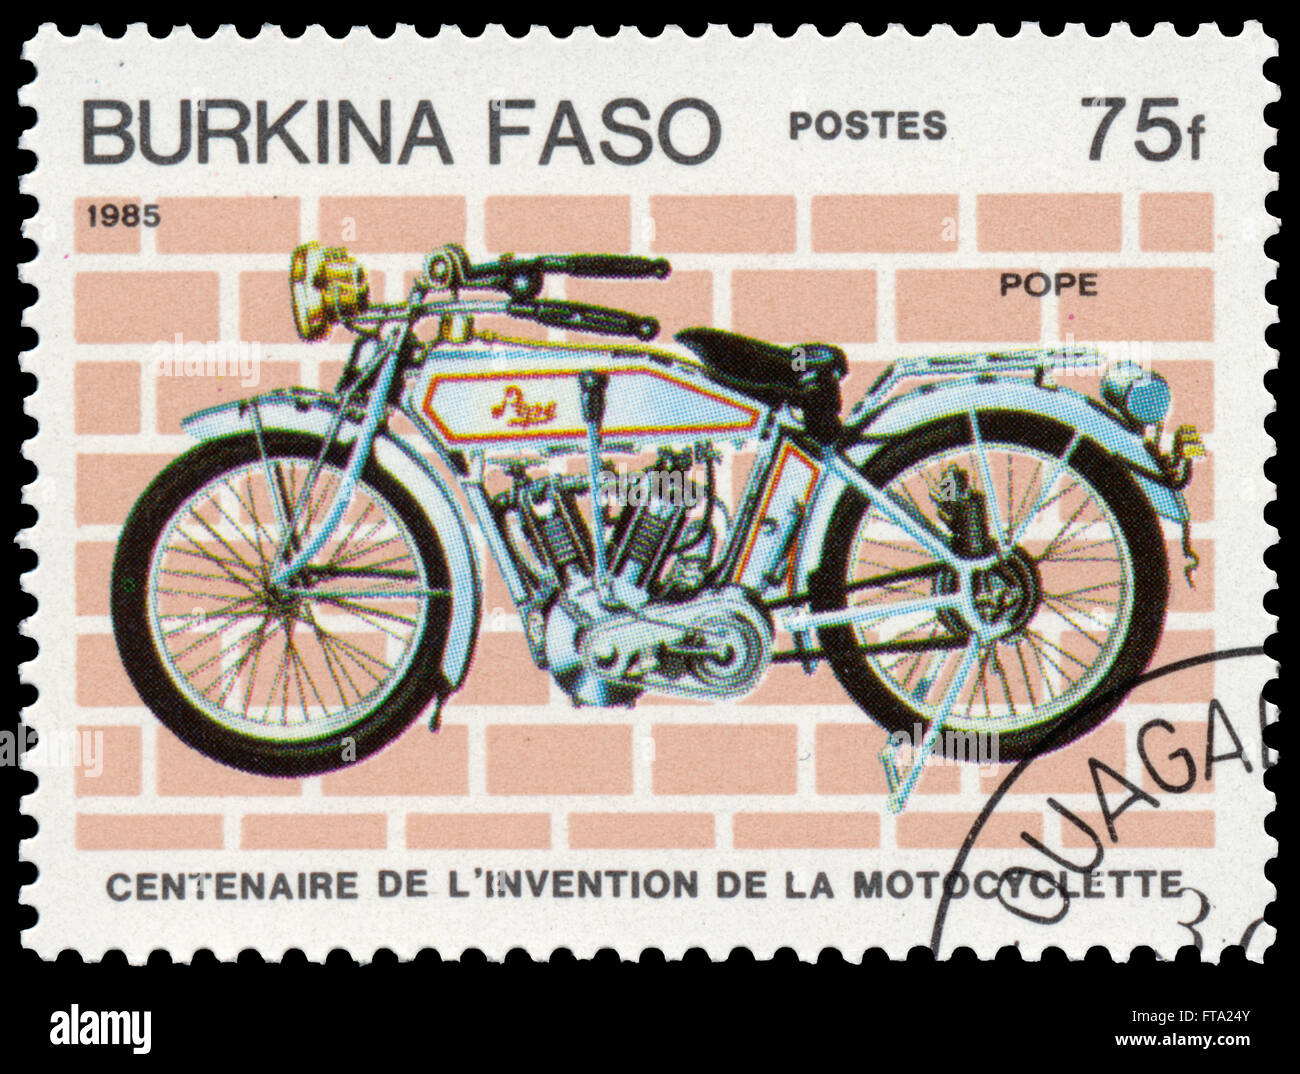 BUDAPEST, HUNGARY - 18 march 2016:  a stamp printed in Burkina Faso shows image of a vintage motorcycle, Pope, circa 1985 Stock Photo